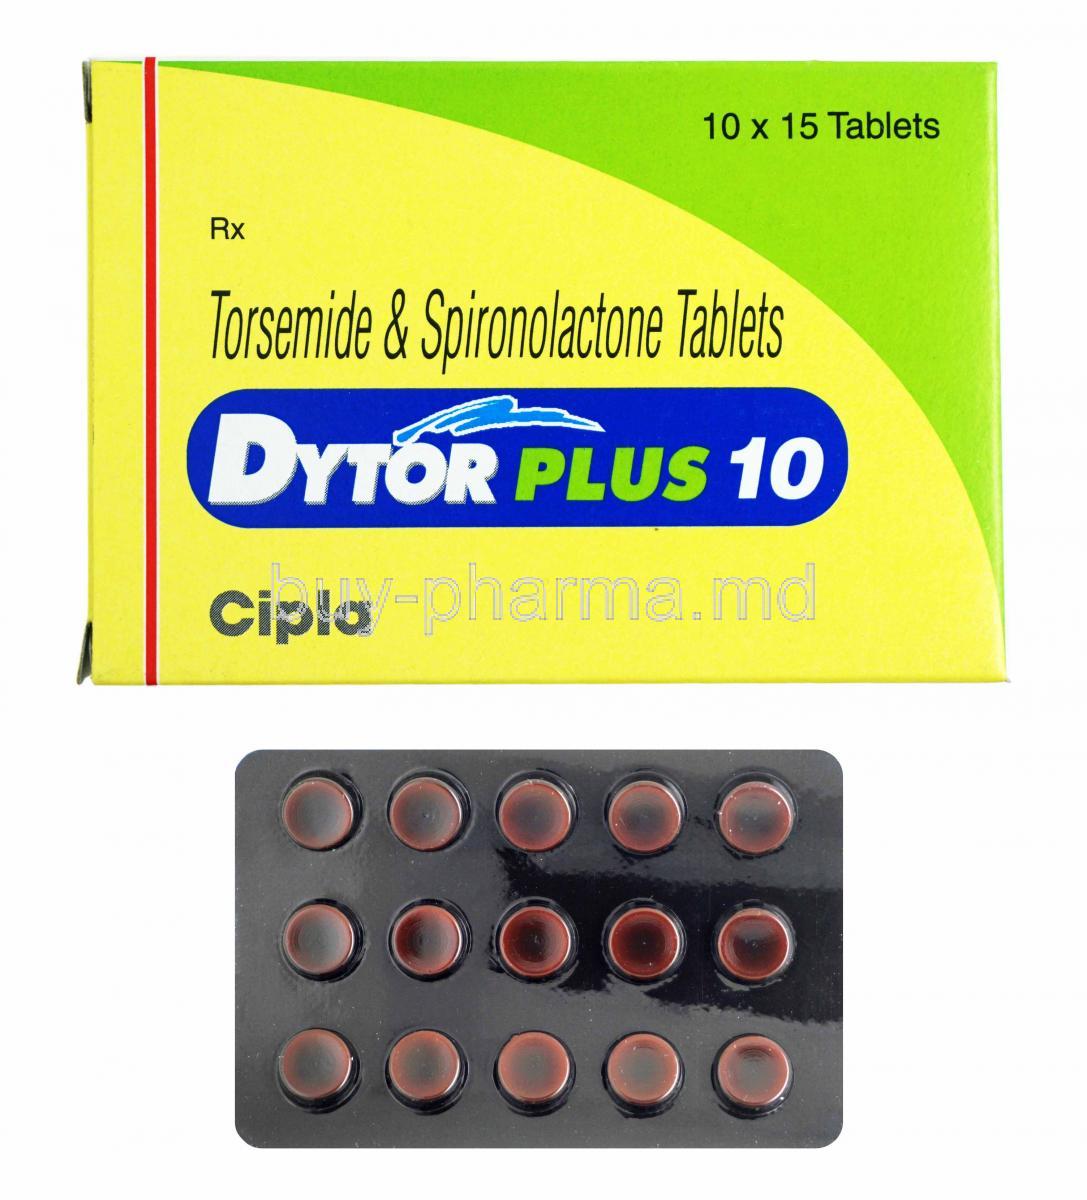 Dytor Plus, Spironolactone and Torasemide box and tablets